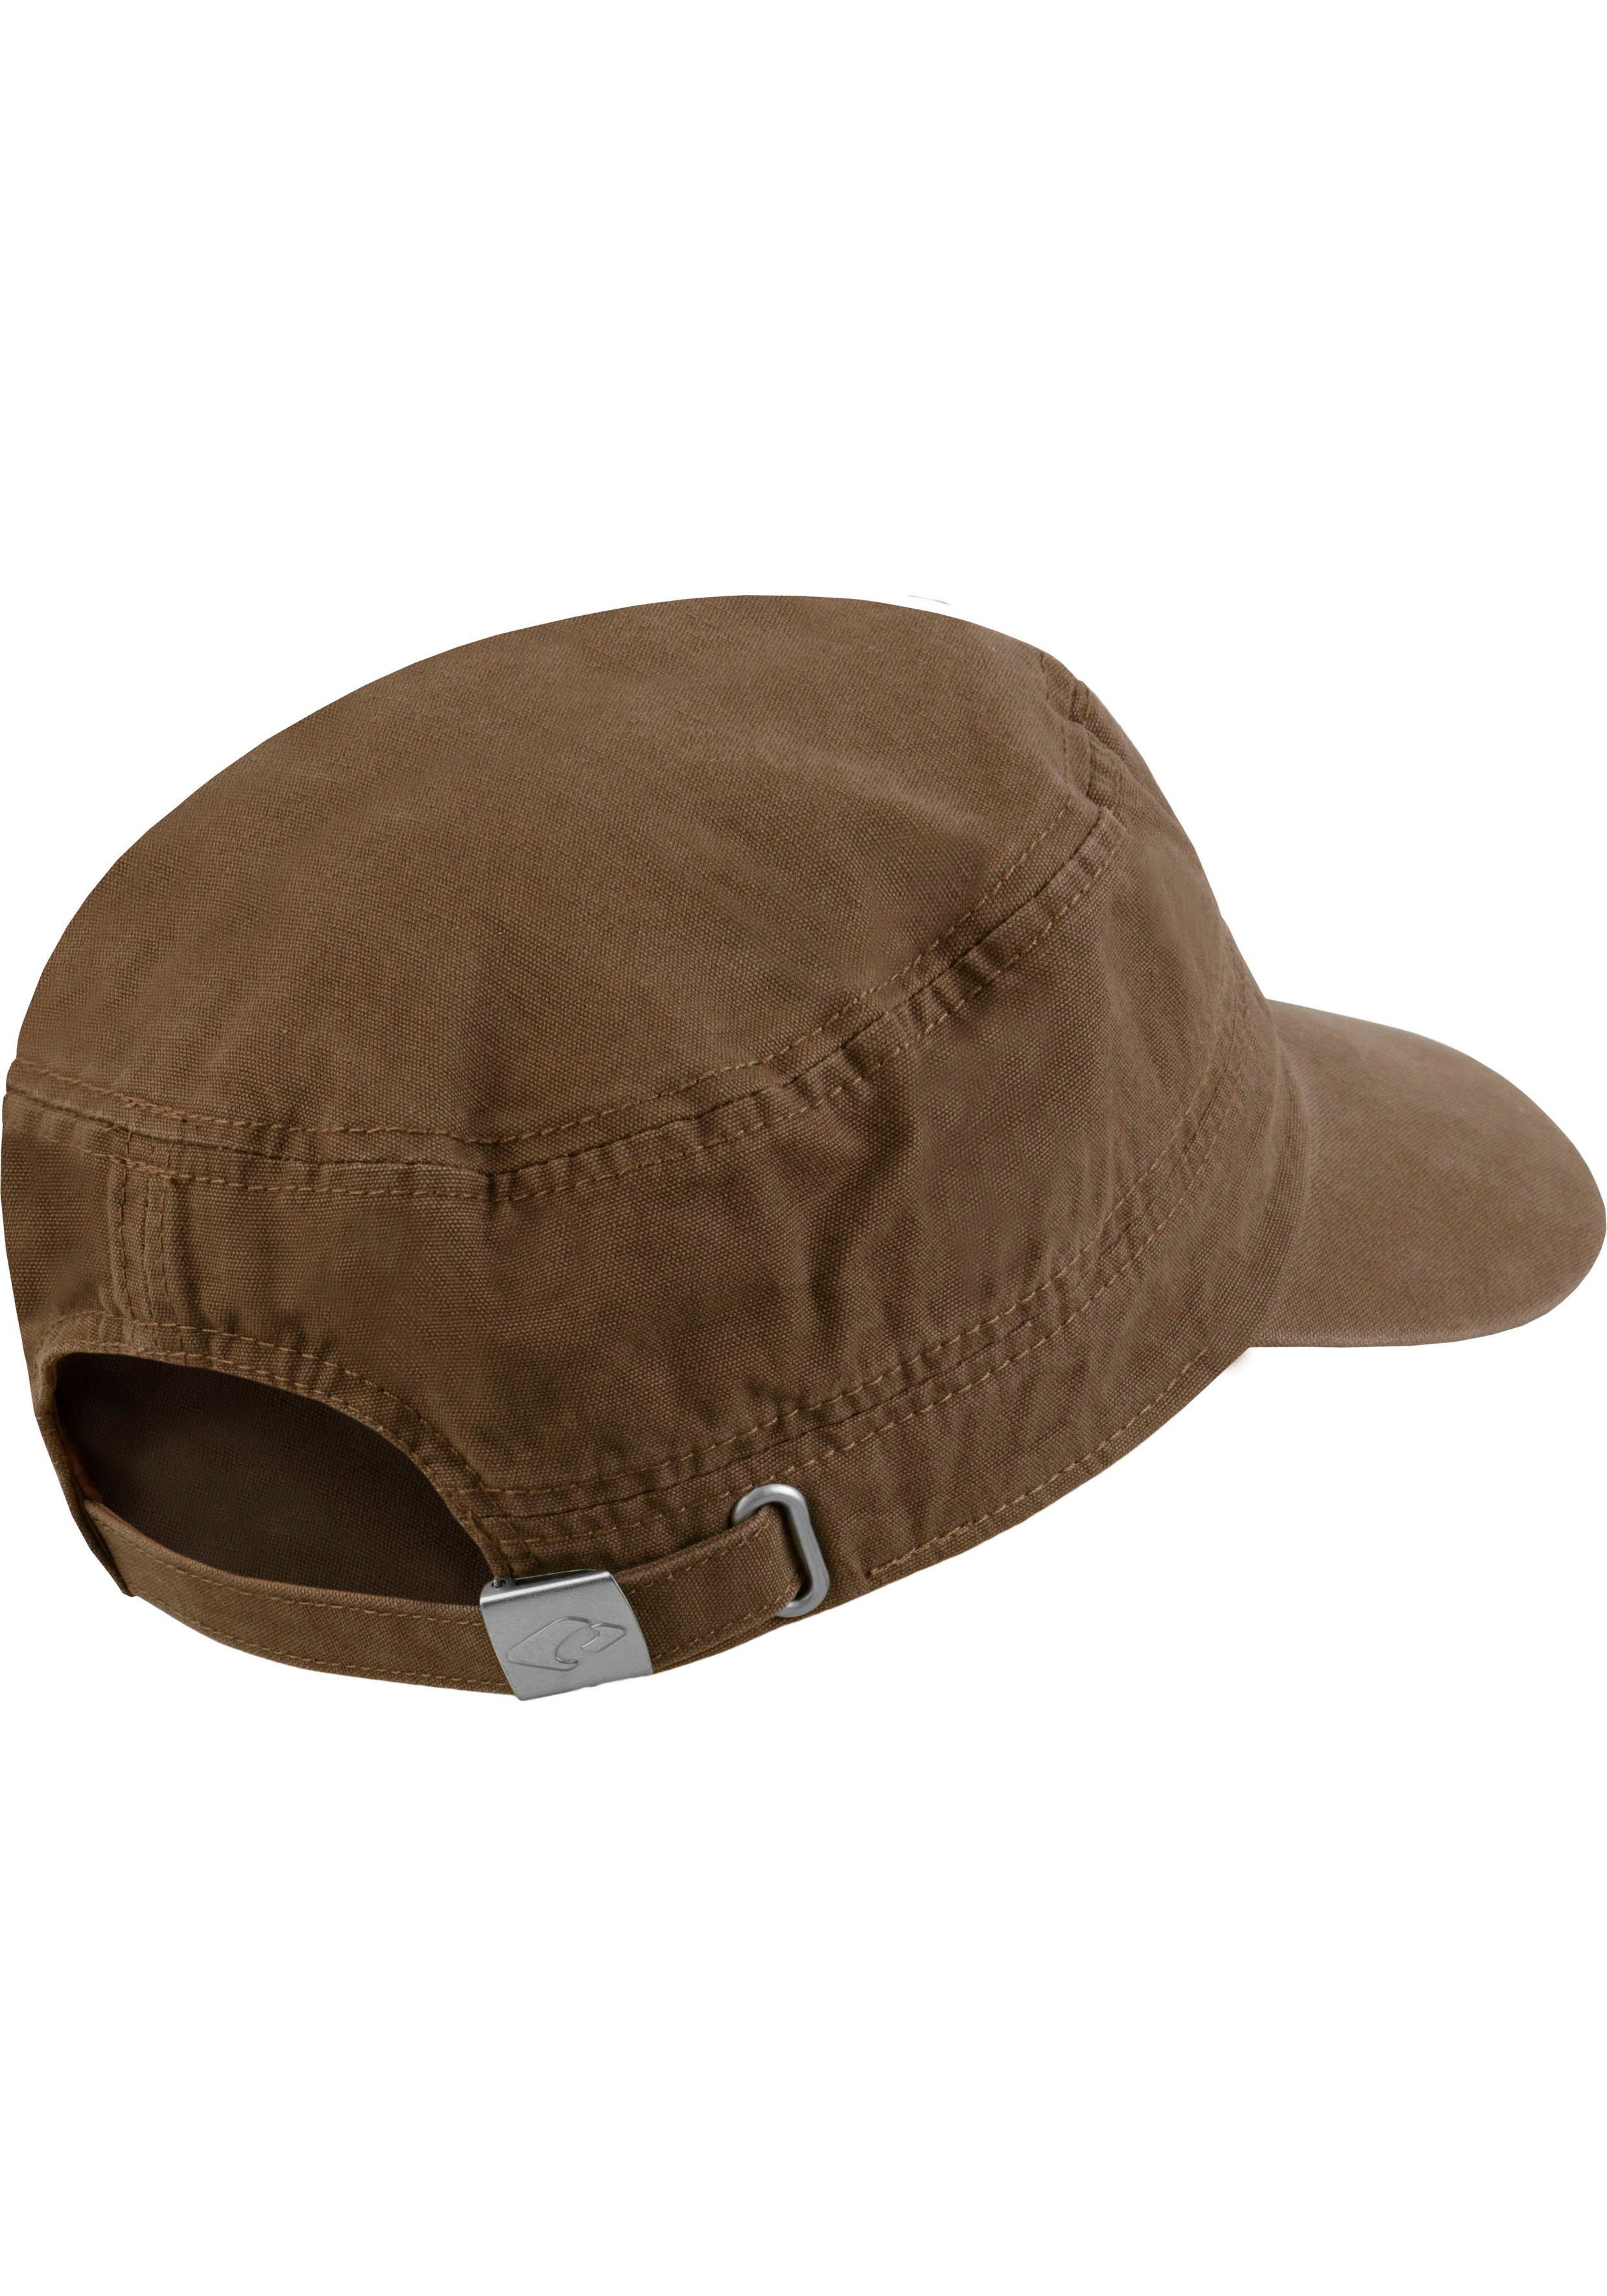 Dublin chillouts Cap im Mililtary-Style Hat braun Cap Army